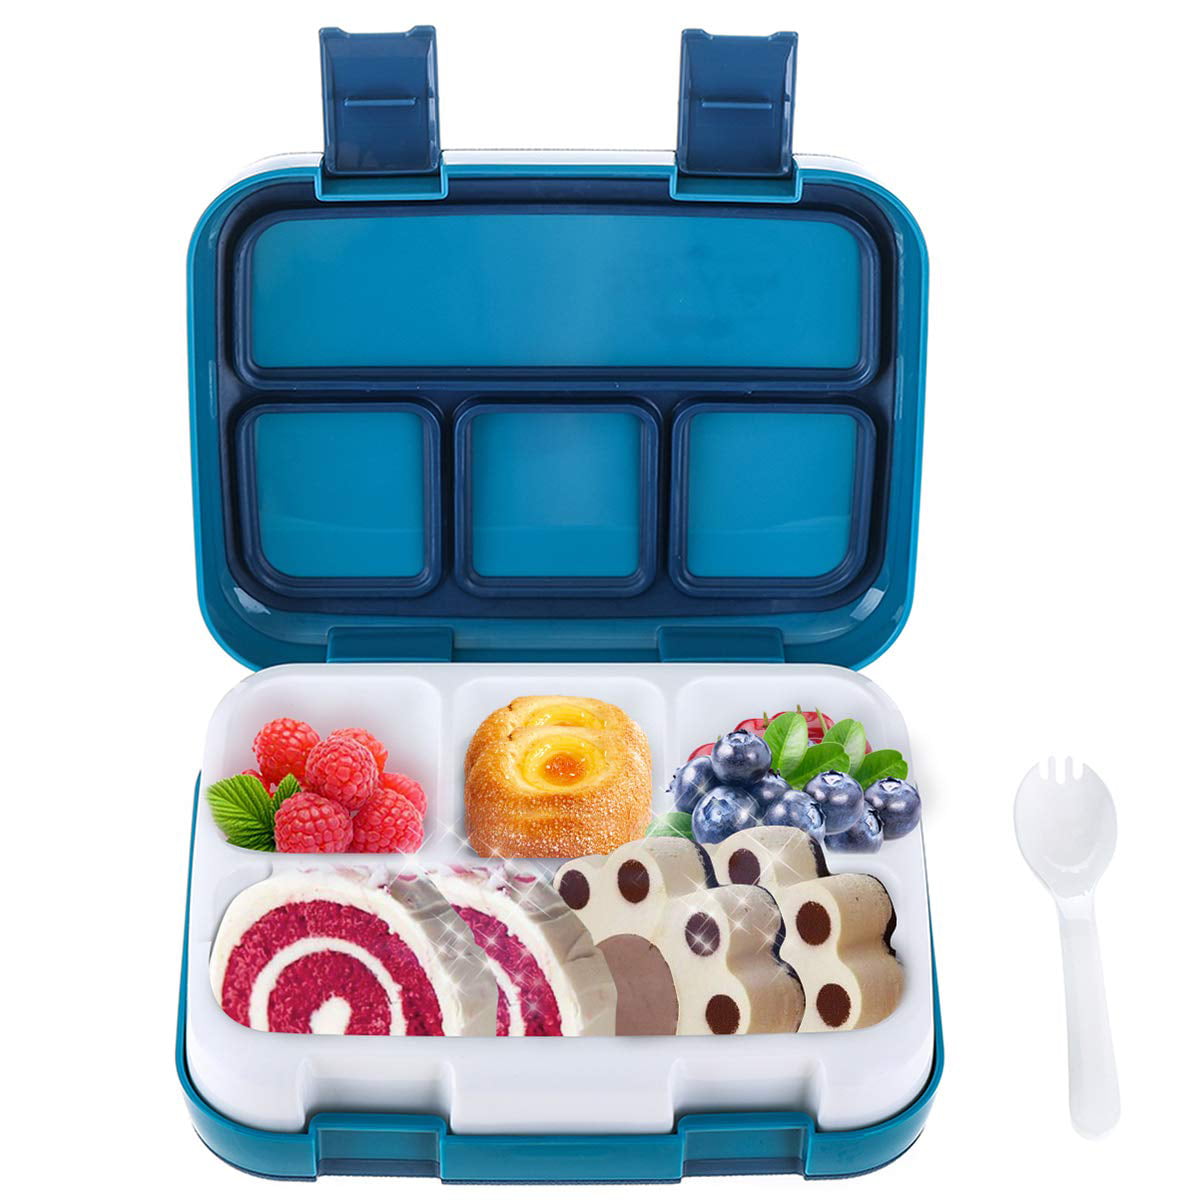 Details about   Bento Lunch Box All Boxed Up Food Storage Container Sandwich Eco Friendly Green 